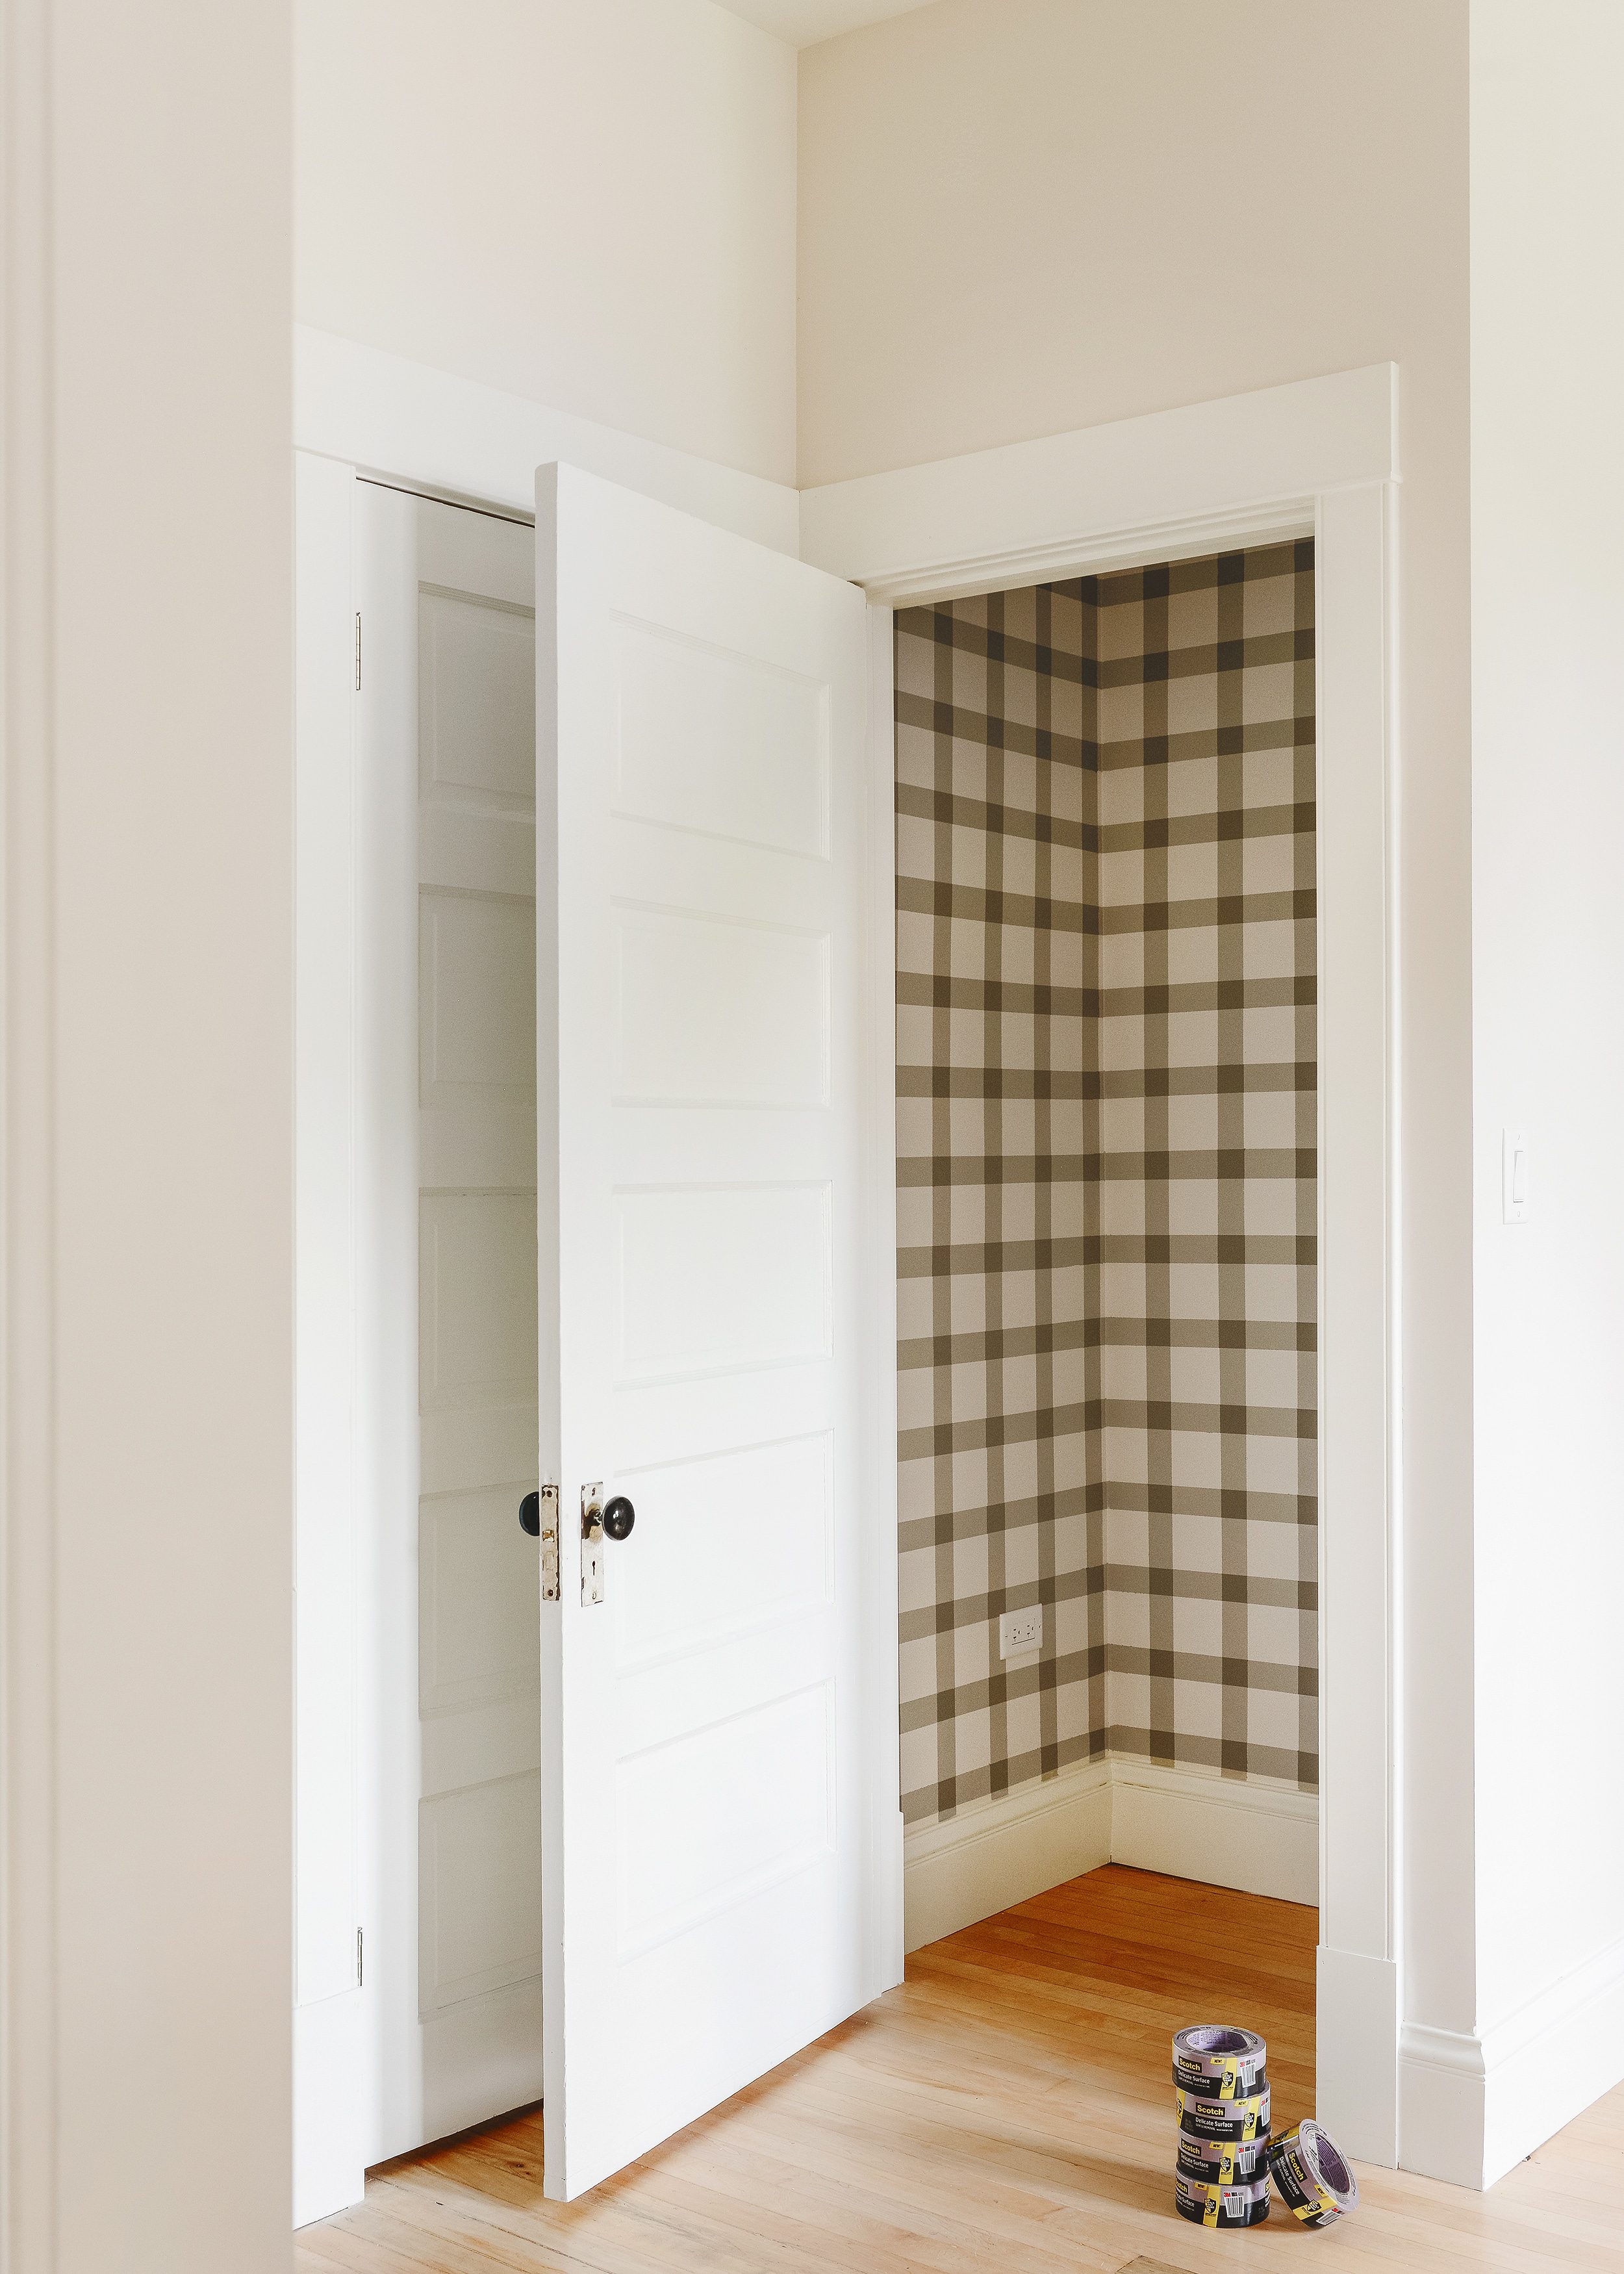 A view of the pantry closet showcasing a painted DIY plaid pattern | via Yellow Brick Home